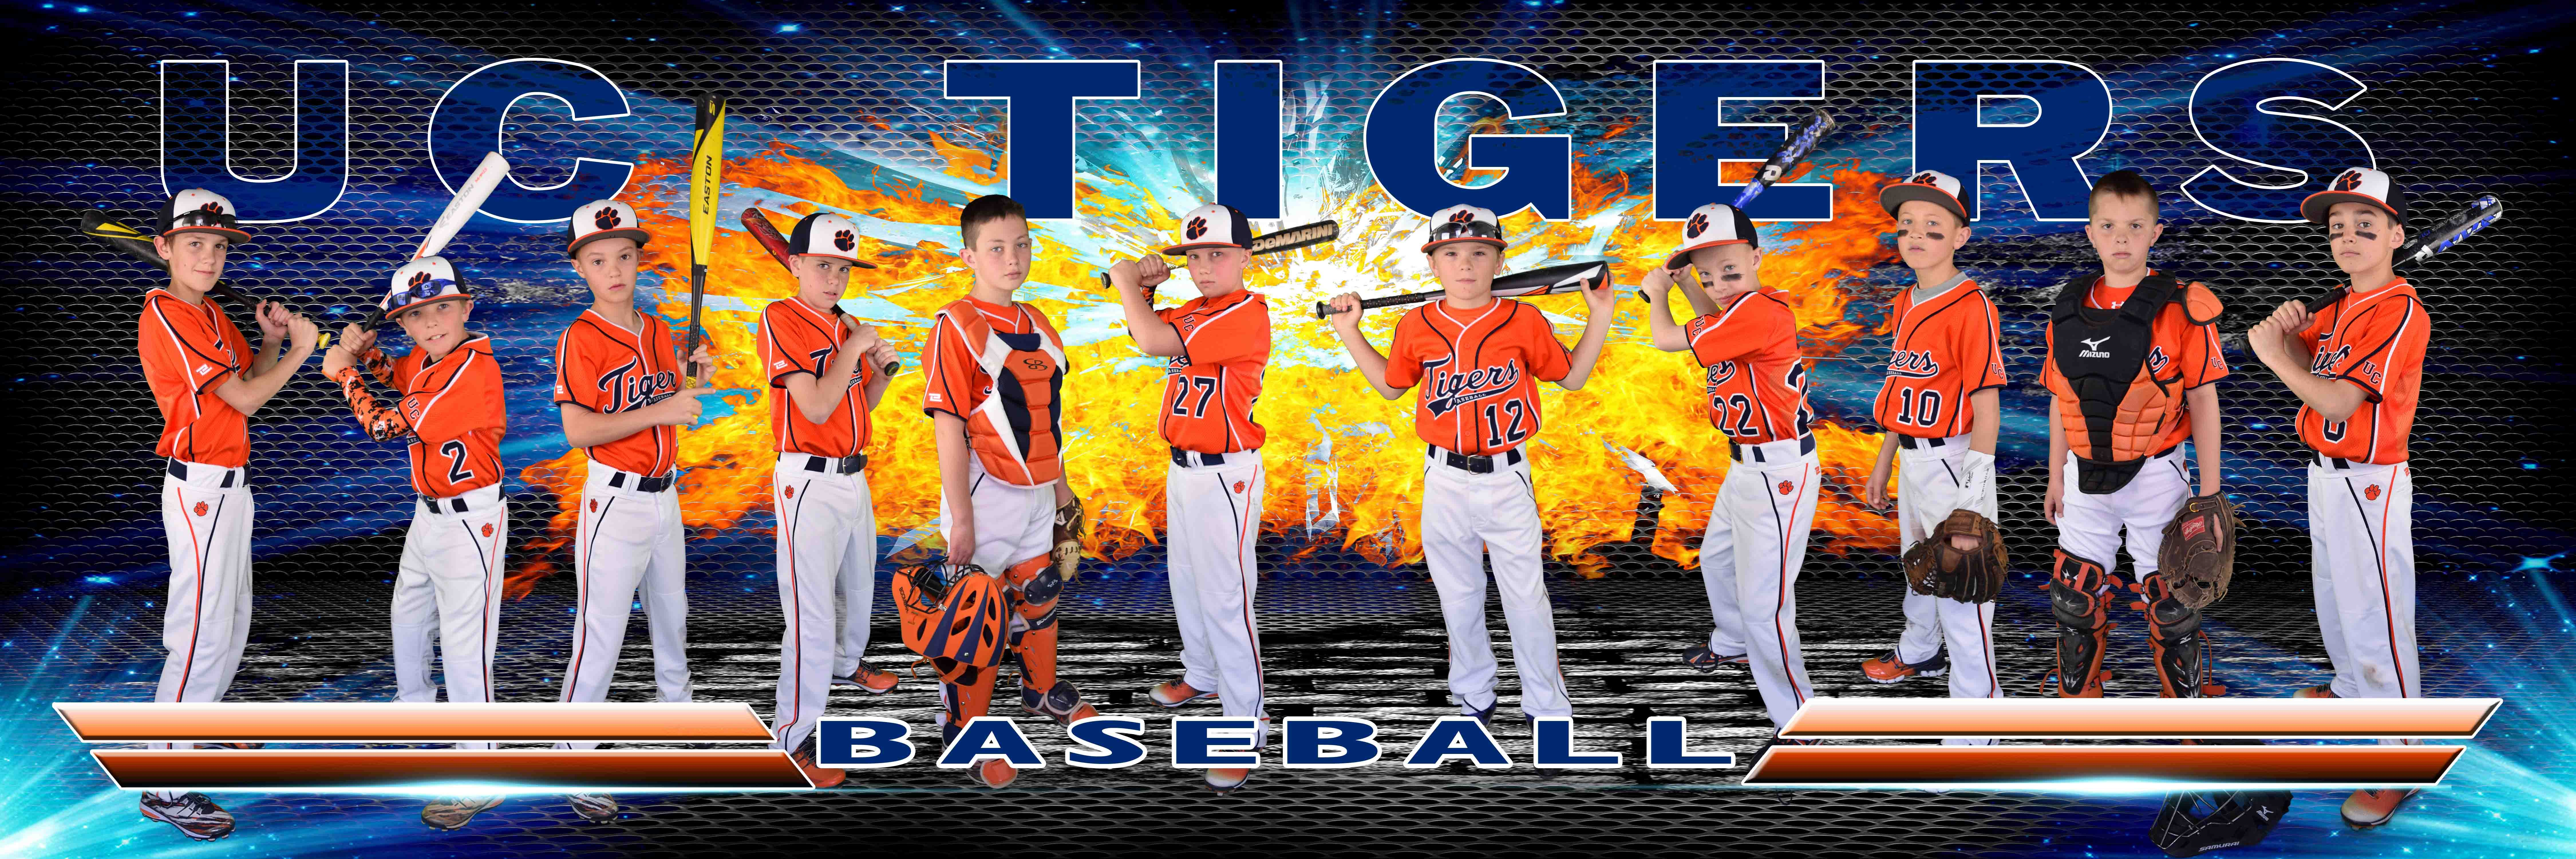 Team Templates  Awesome Sport Banners for Sports Banner Templates